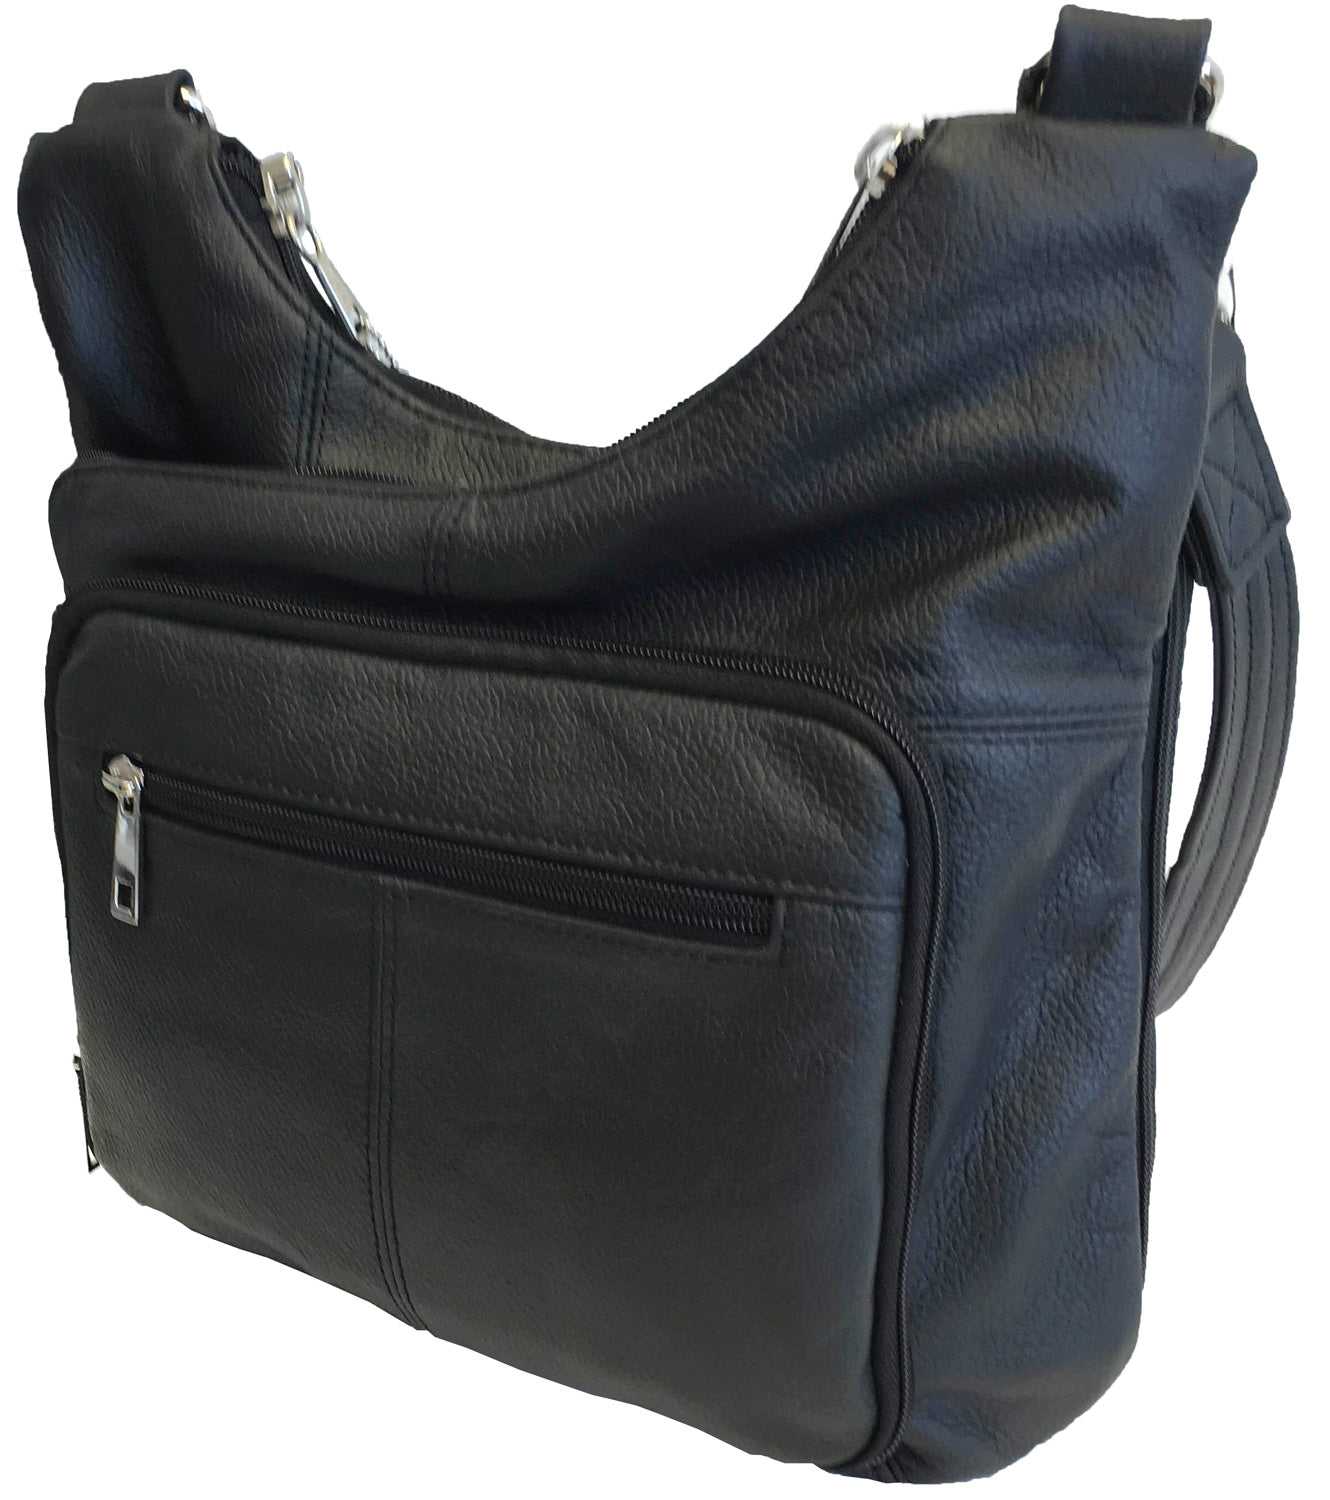 Genuine Leather Adjustable Crossbody Concealed Carry Purse – ccwbags.com